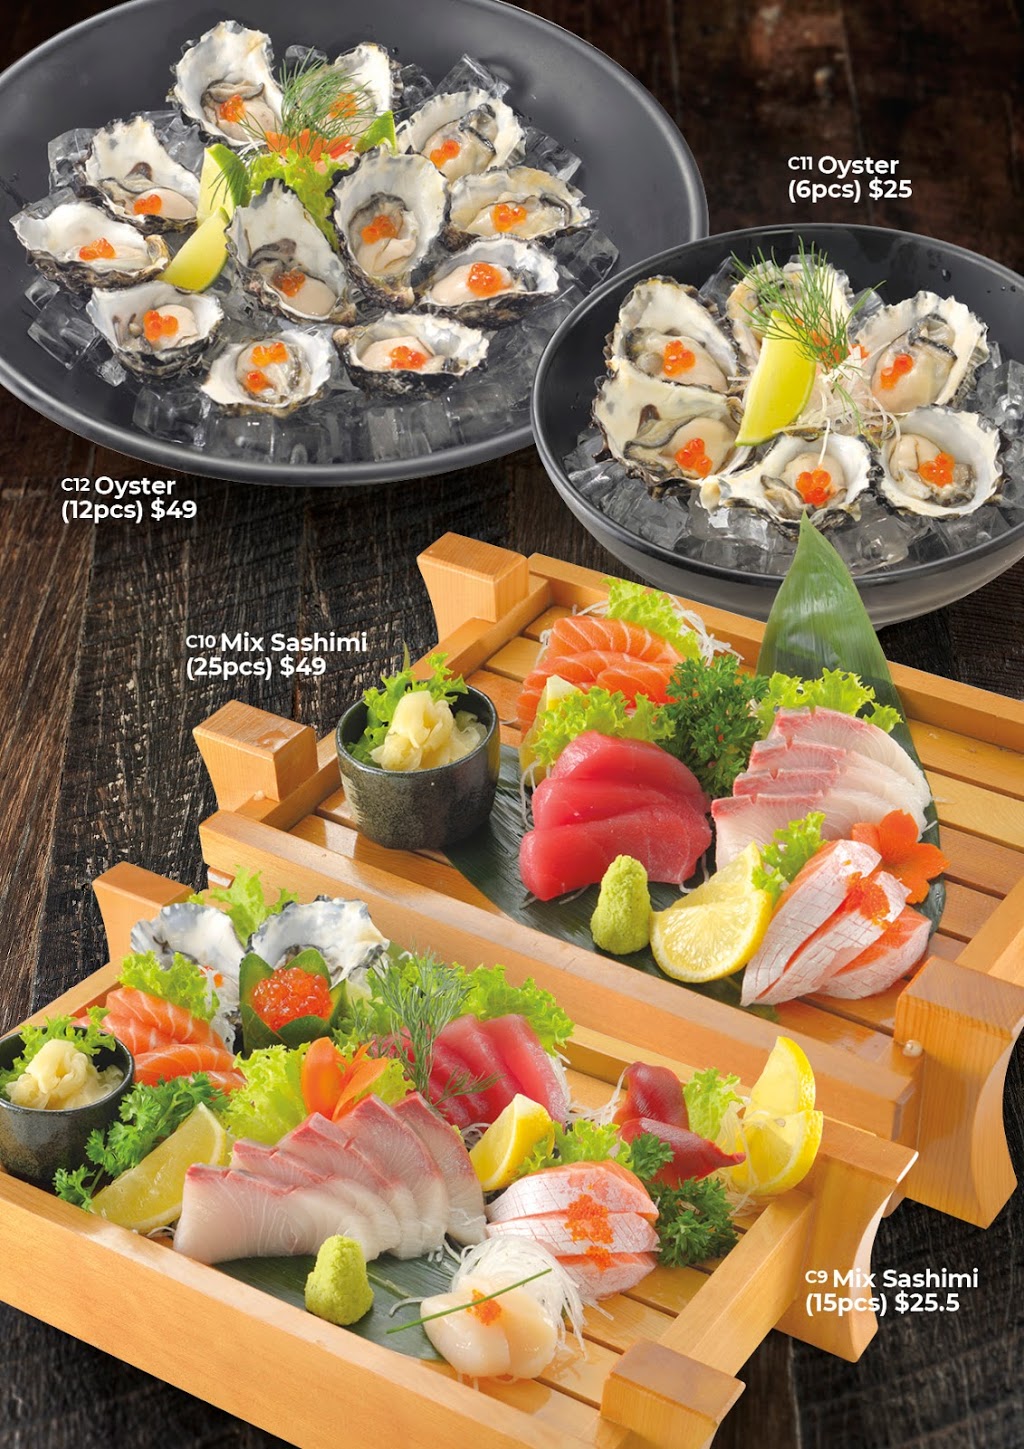 Eat Sushi Cammeray(Catering) | Shop 002 , Stockland Cammeray, 450 Miller Street, Cammeray NSW 2062, Australia | Phone: 0424 508 879